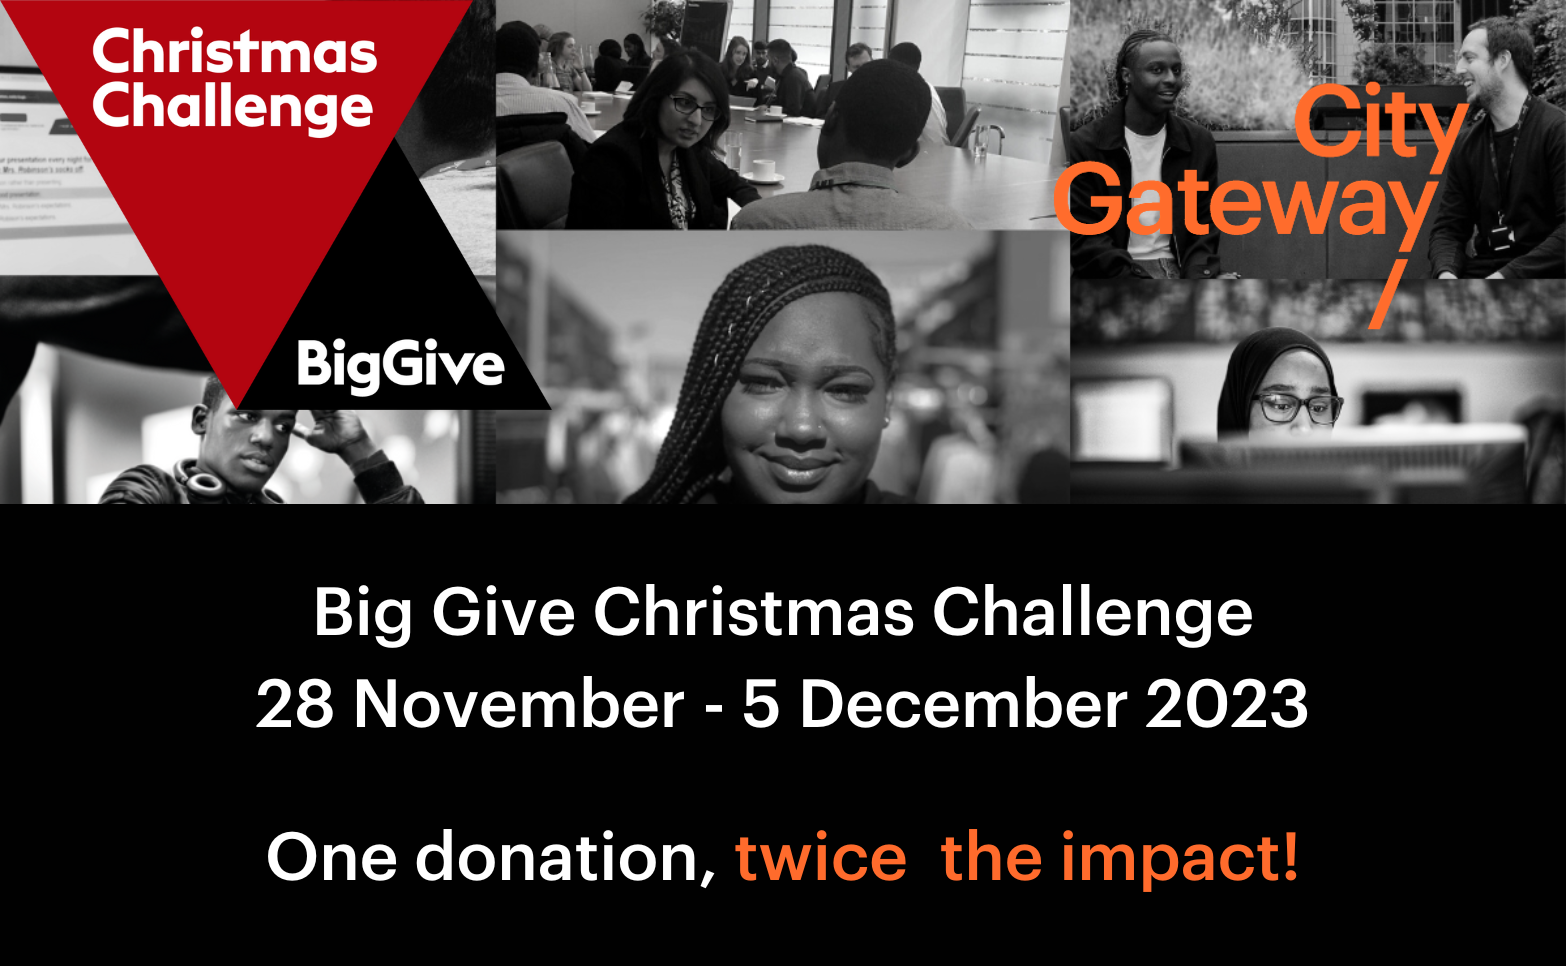 Join Us in Doubling the Christmas Spirit for Young People